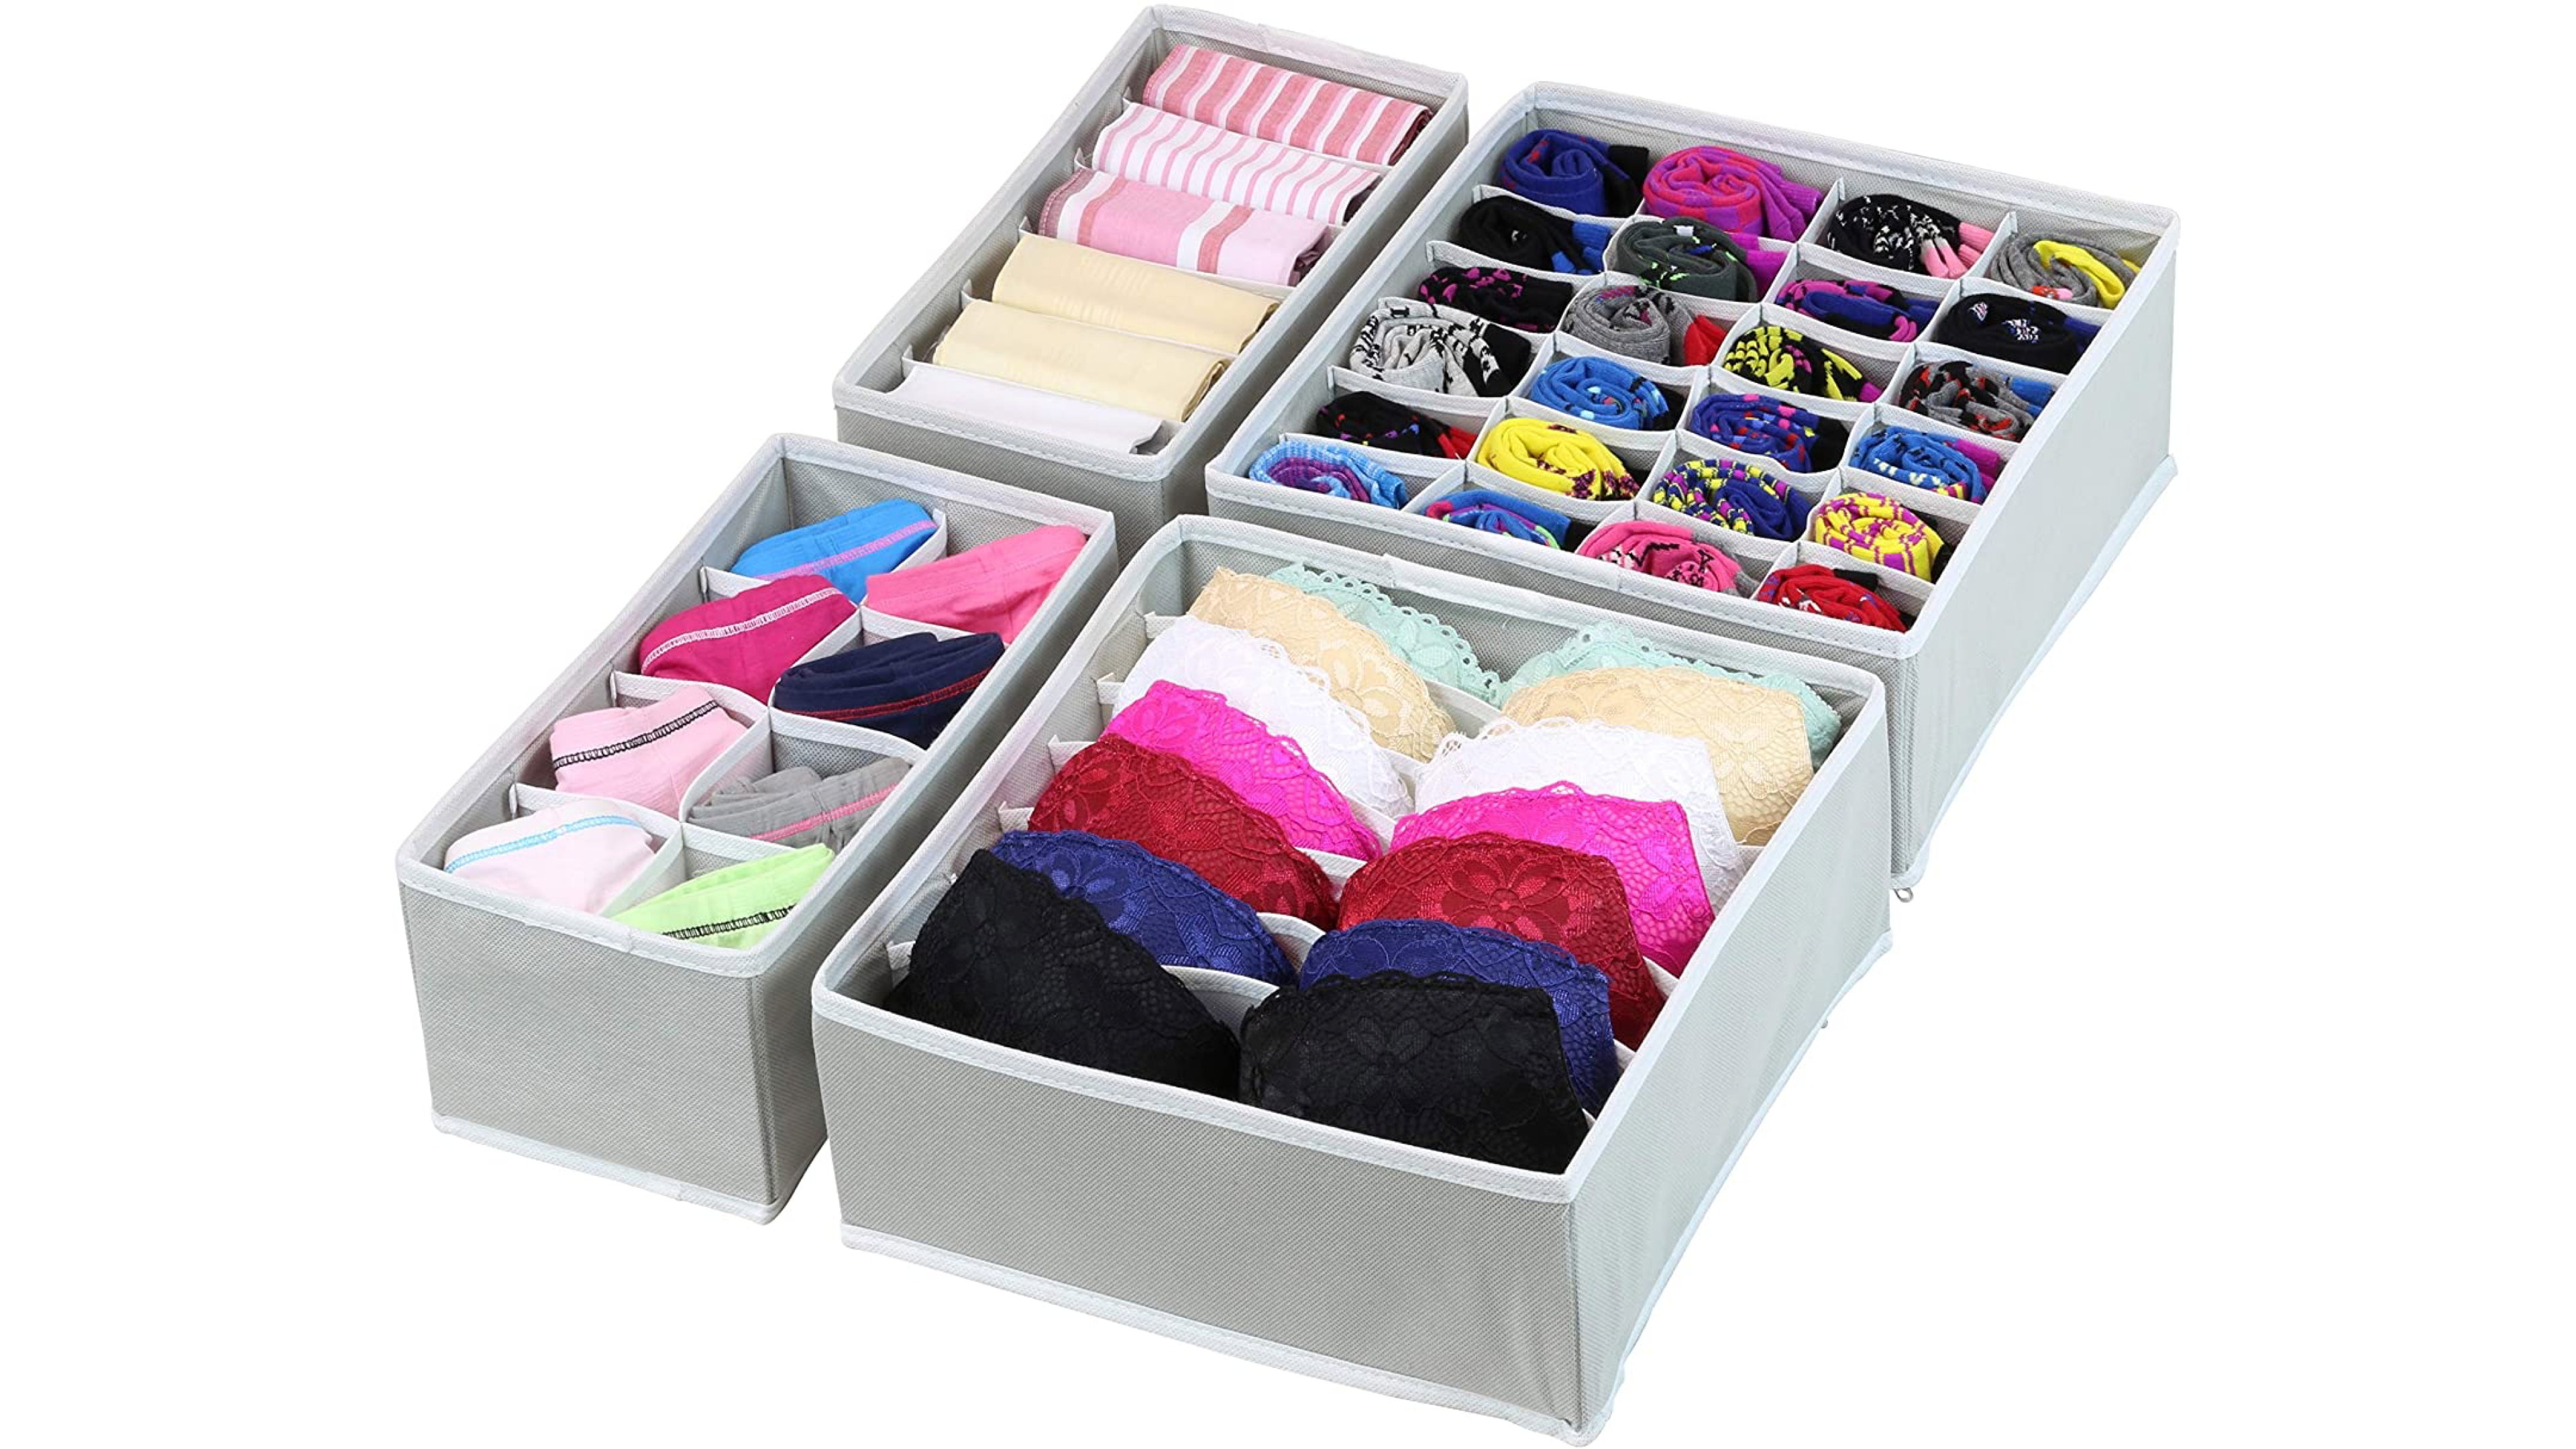 drawer inserts with little compartments to help organize clothes